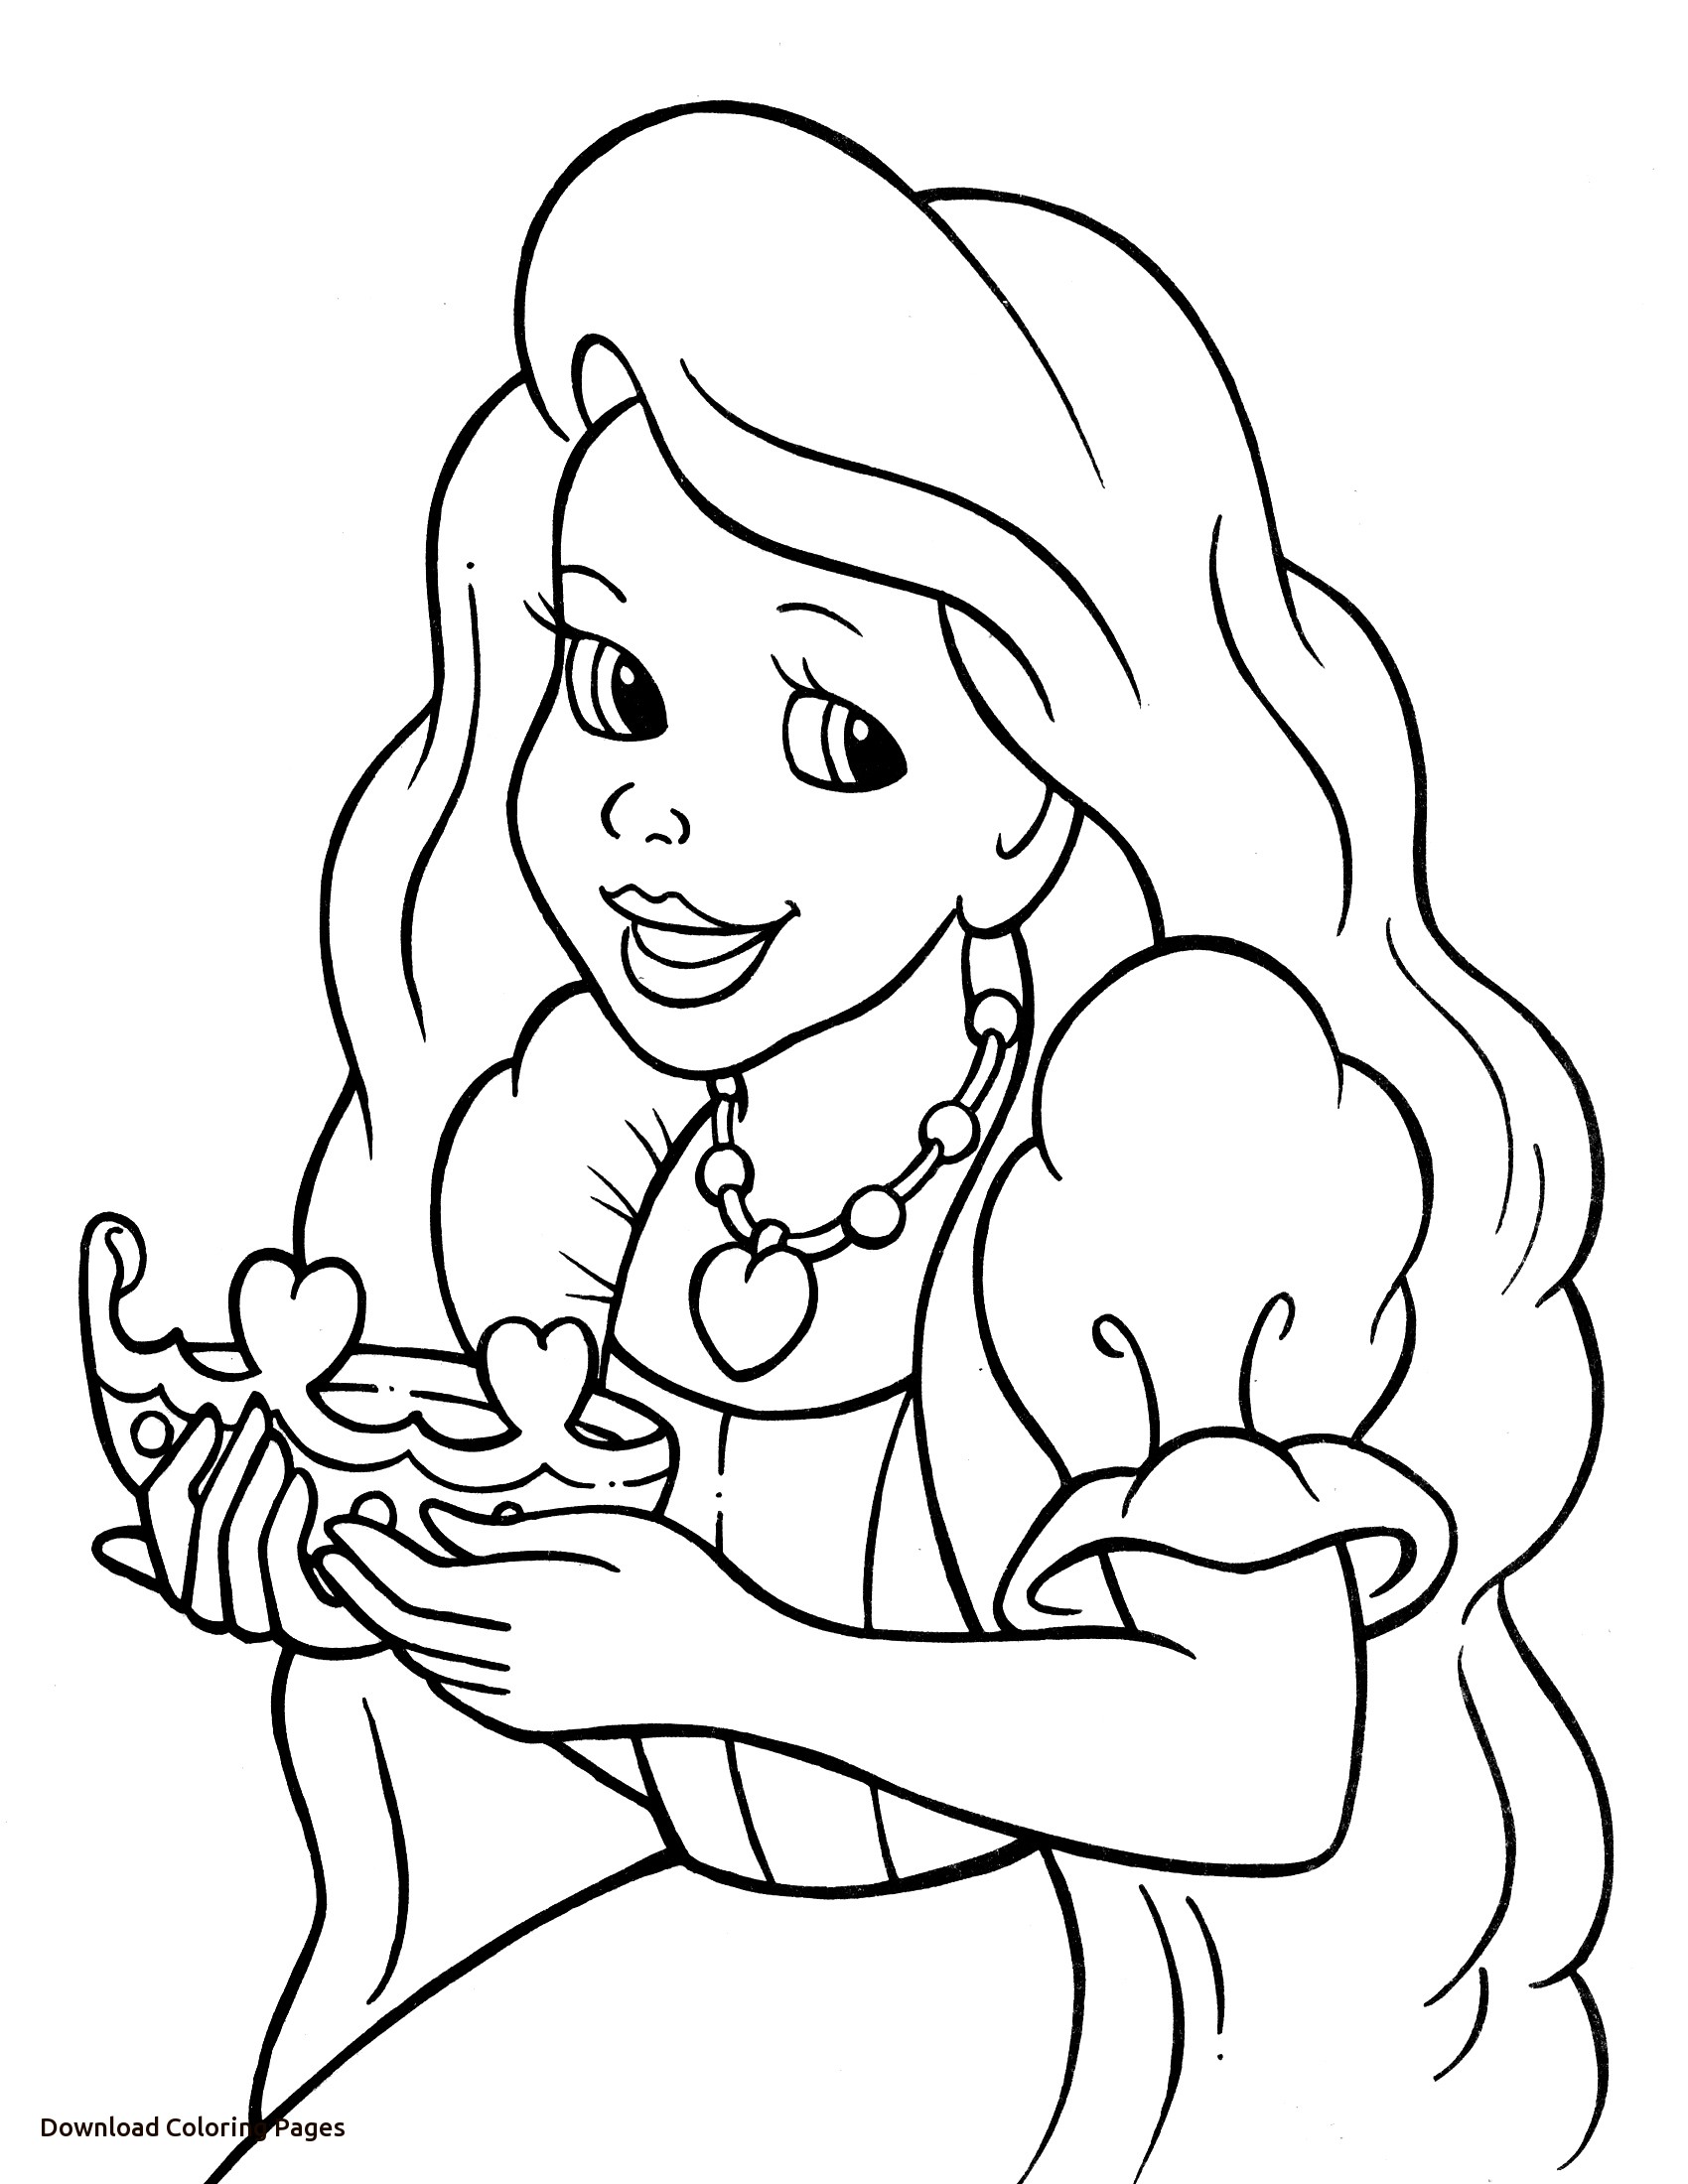 crayola-christmas-coloring-pages-at-getcolorings-free-printable